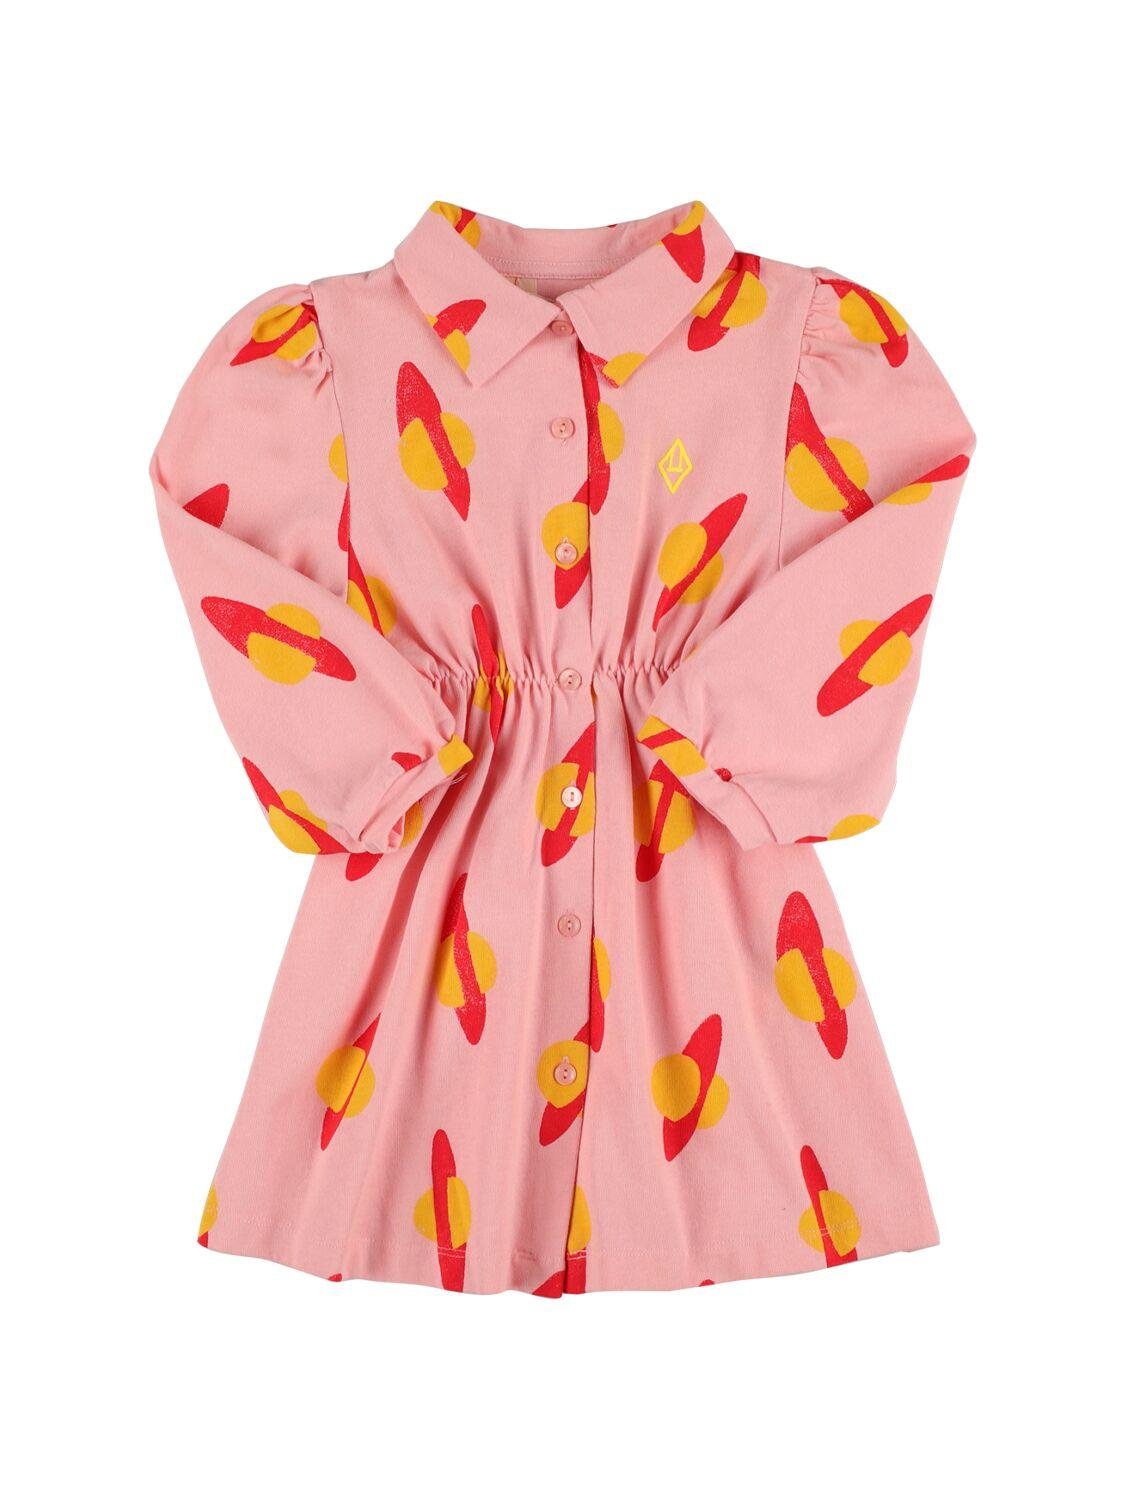 Planet Printed Cotton Shirt Dress by THE ANIMALS OBSERVATORY